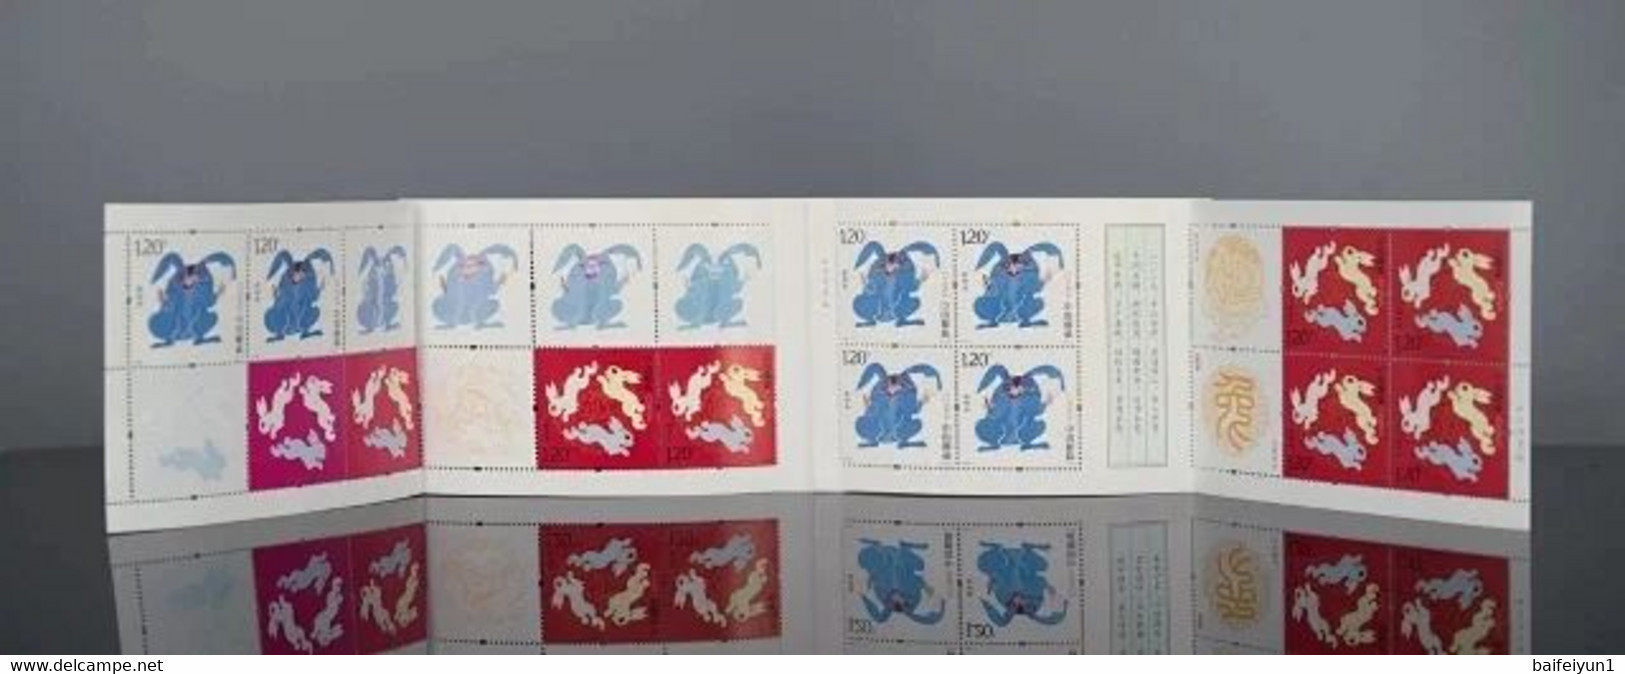 CHINA 2023-1 China New Year Zodiac Of Rabbit Stamp Booklet(Hologram Cover) - Holograms